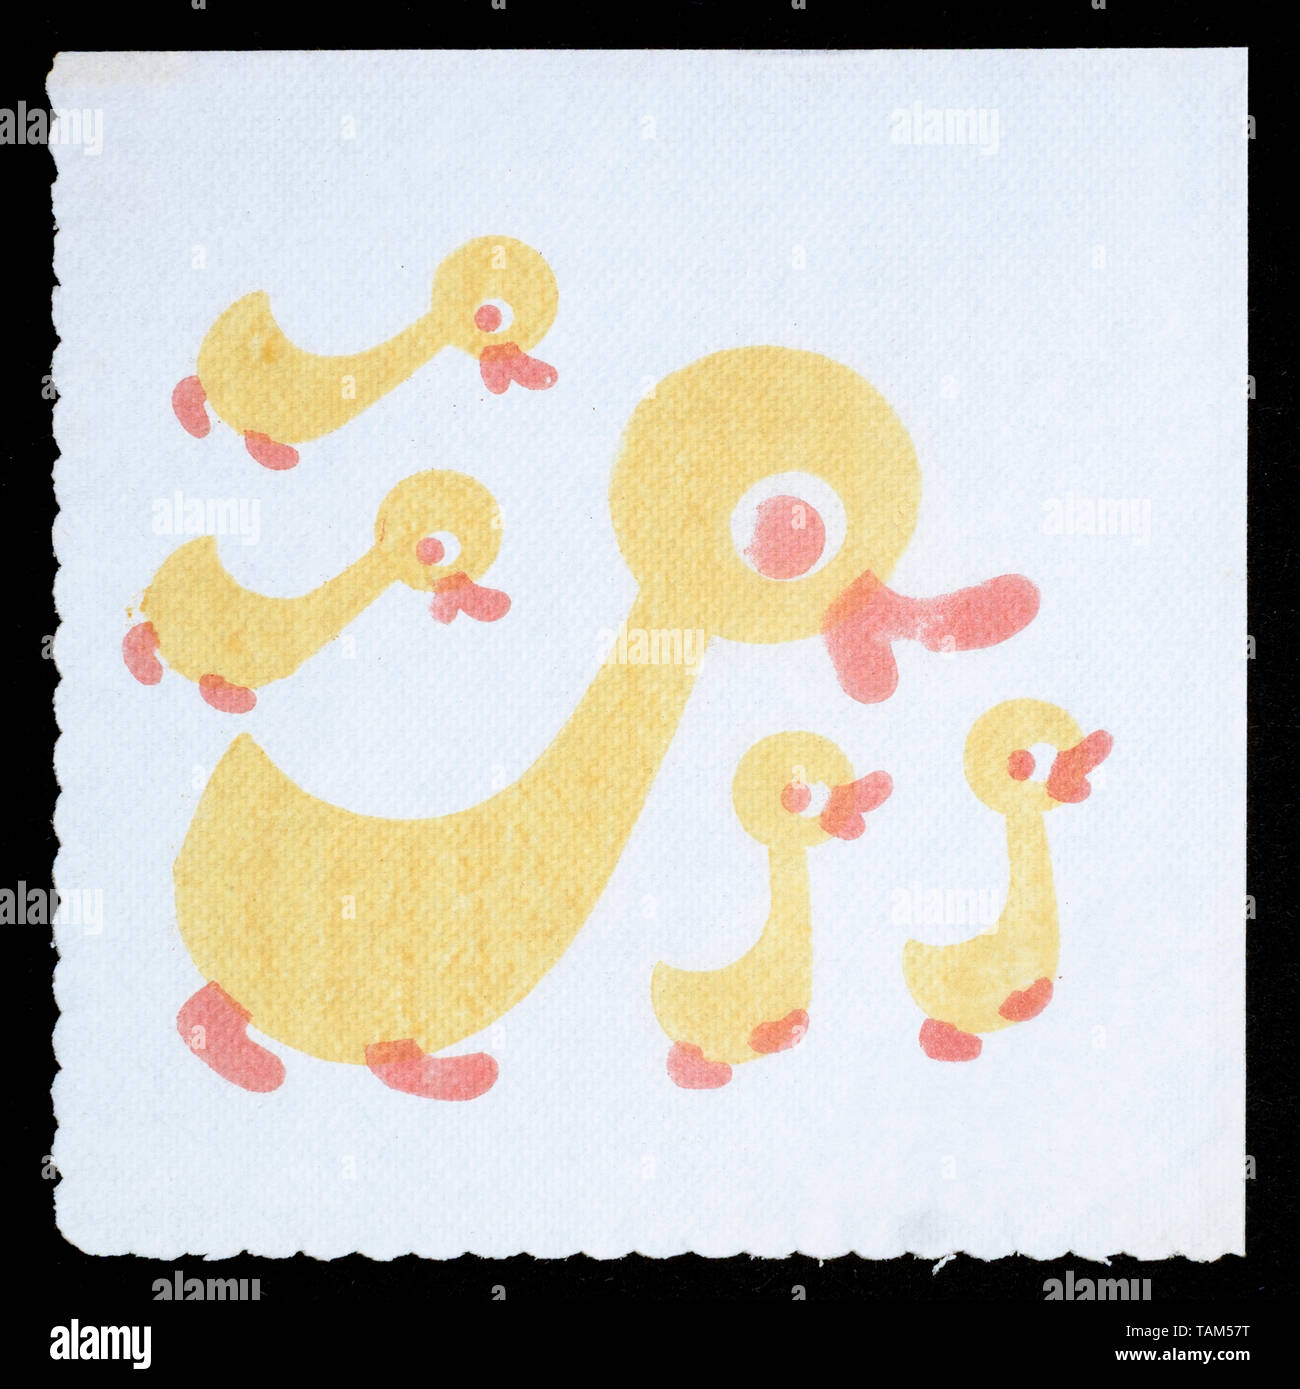 printed paper serviette popular for school children to collect in 1970s hungary Stock Photo